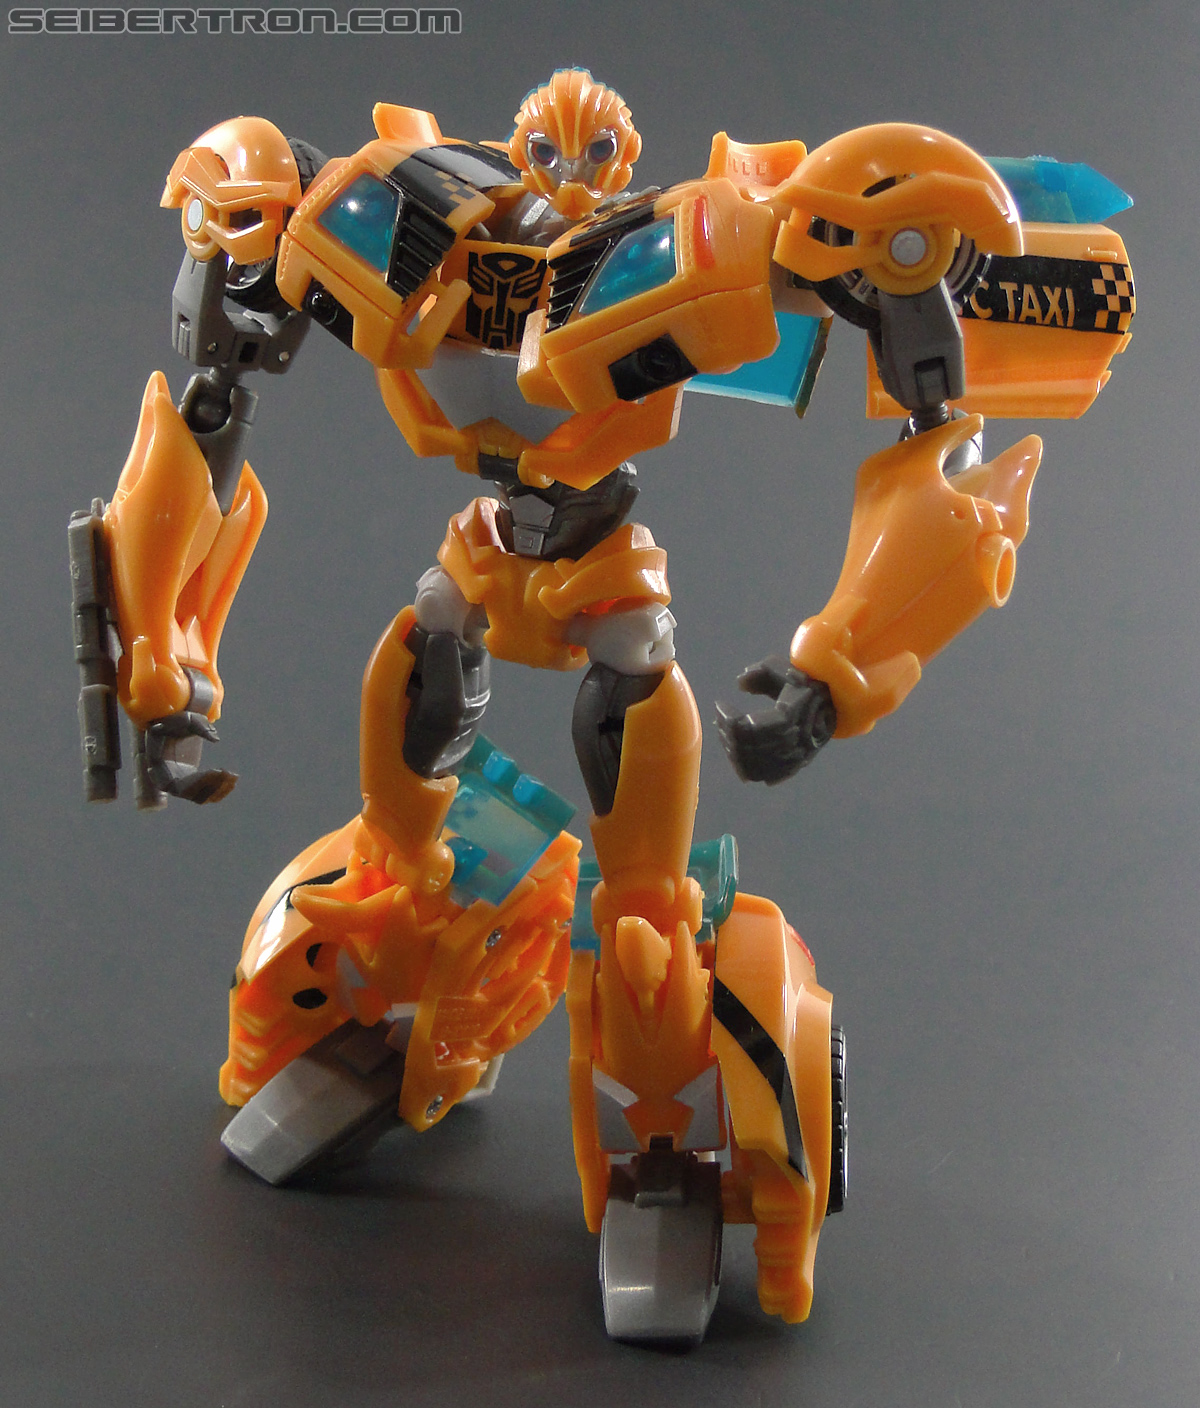 Transformers Prime: First Edition Bumblebee (NYCC) (Image #160 of 185)